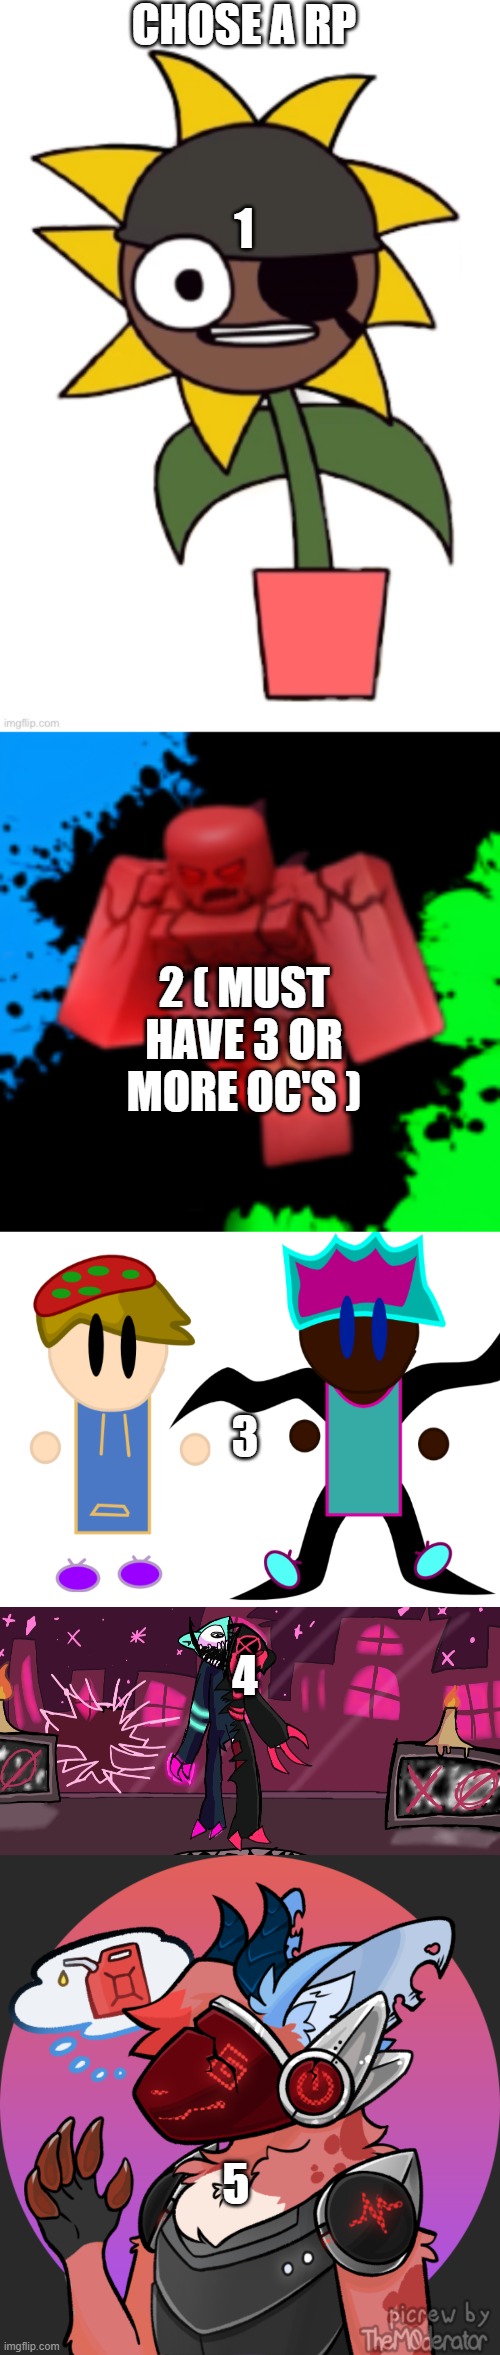 CHOSE A RP; 1; 2 ( MUST HAVE 3 OR MORE OC'S ); 3; 4; 5 | image tagged in demoflower,strangler | made w/ Imgflip meme maker